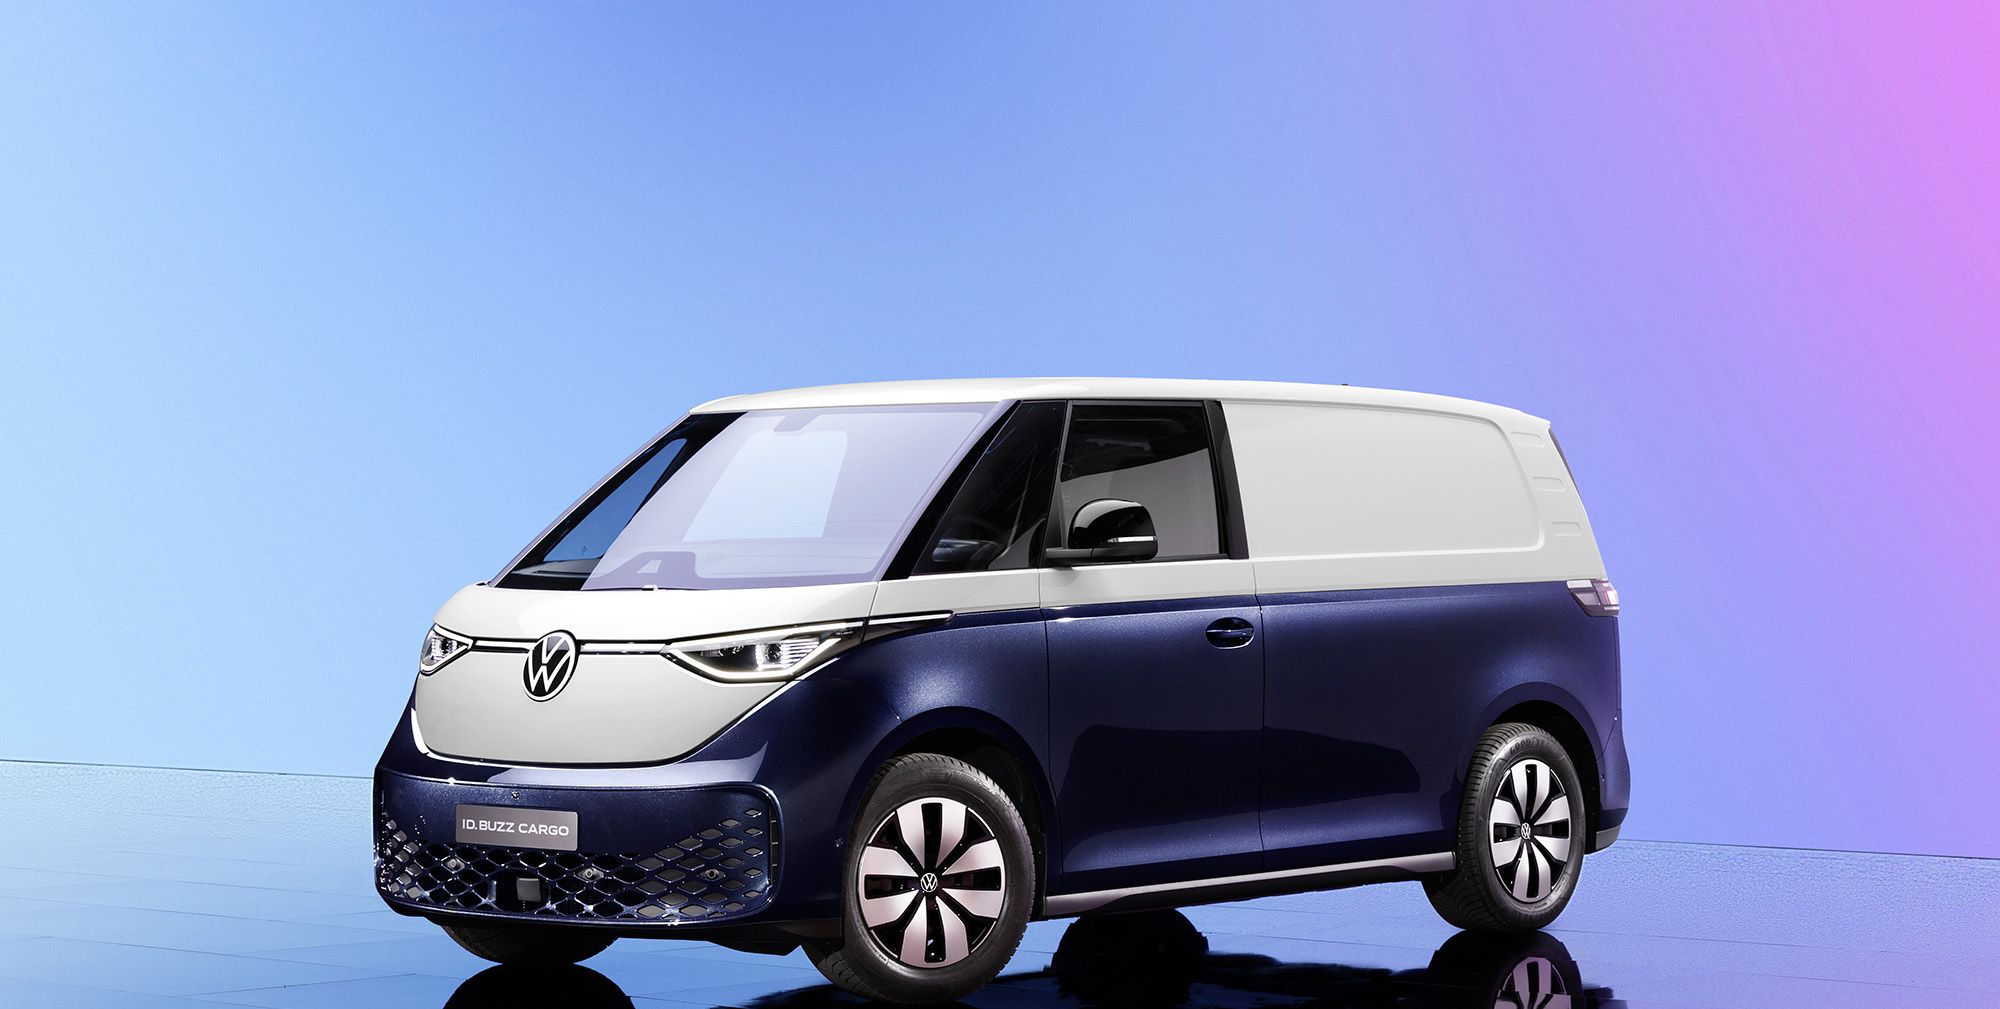 Here's Why VW's ID. Buzz Cargo Is Not Coming to US